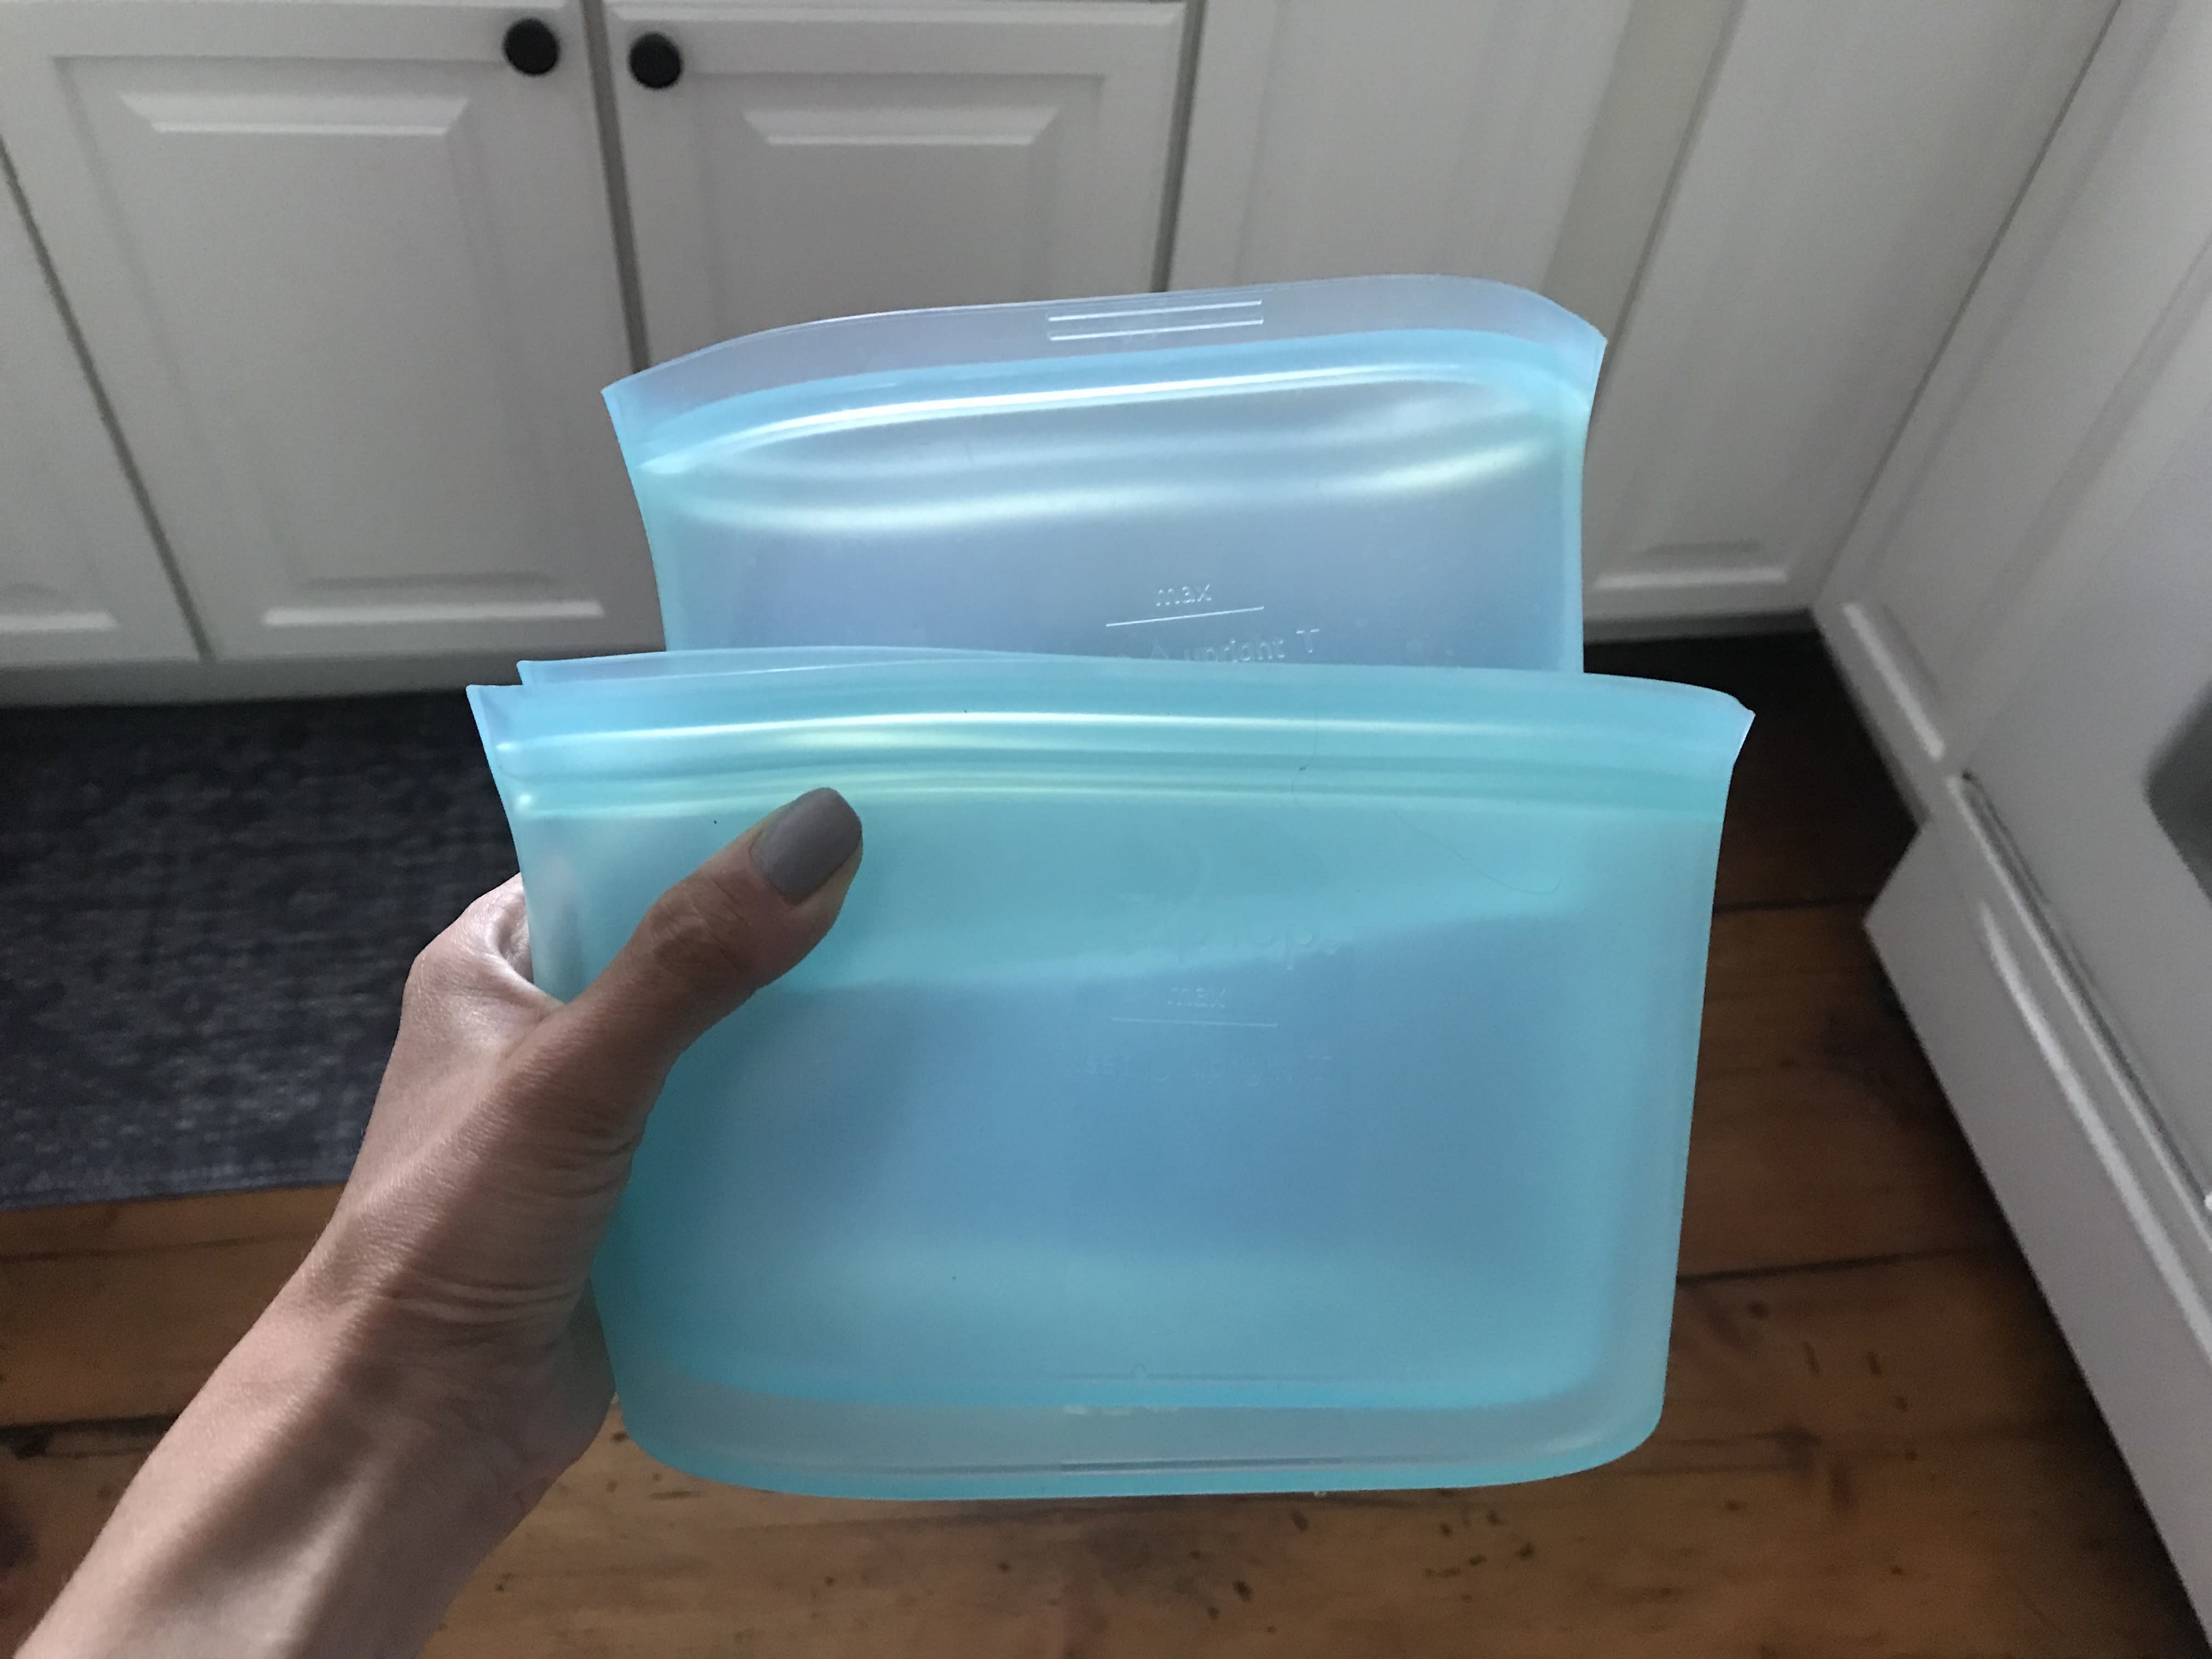 Gourmanity Cook Silicone Storage Bags with Zip Top 10 Bags